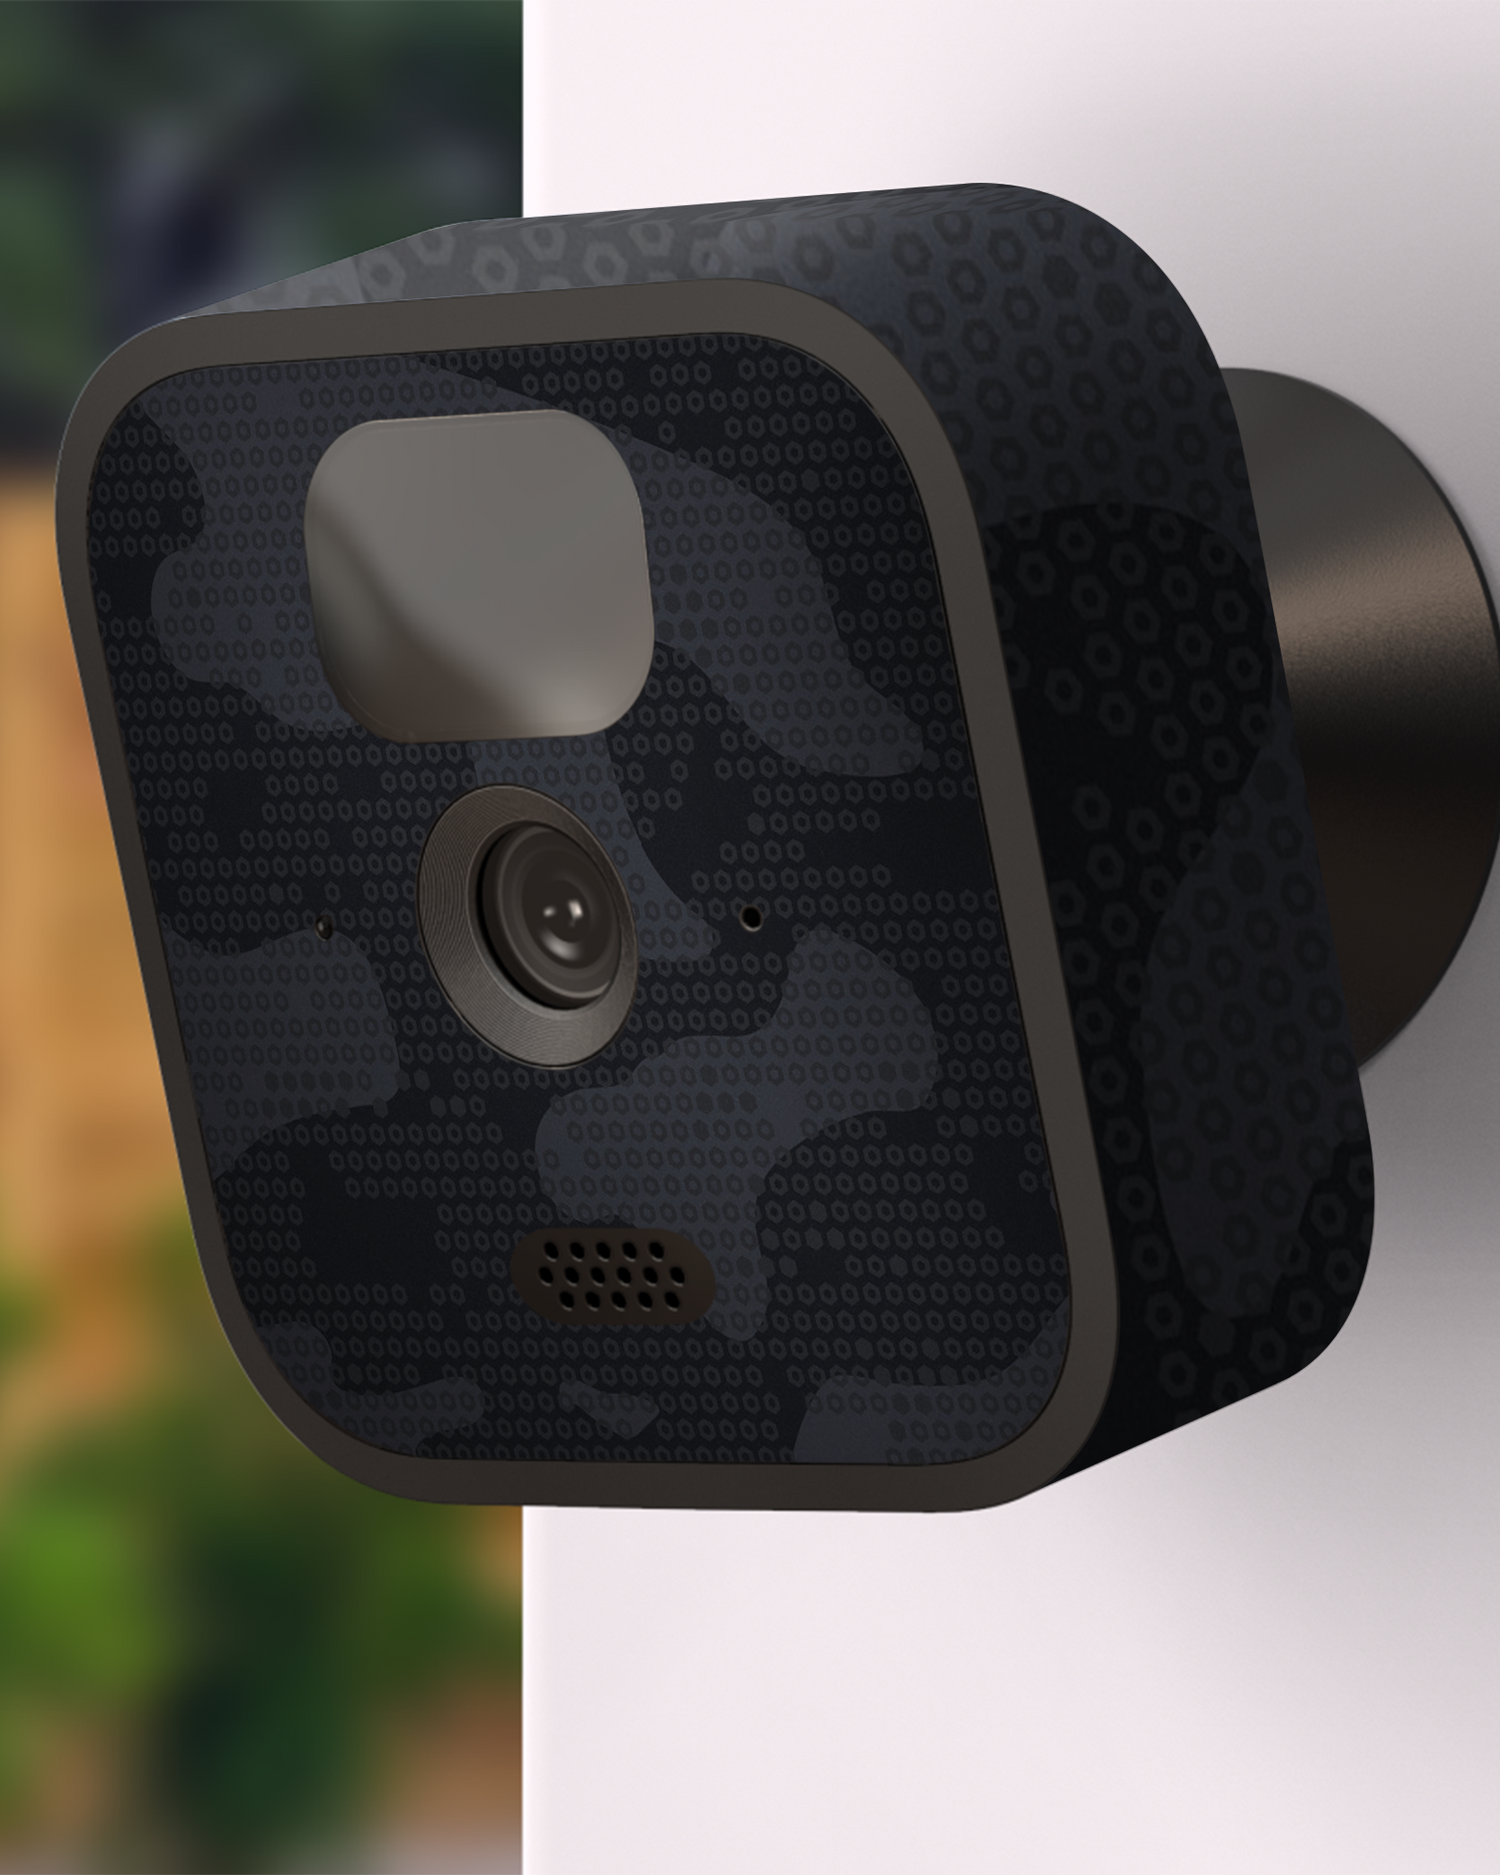 Spec Ops Dark Camera Skin Blink Outdoor (2020) attached to exterior wall